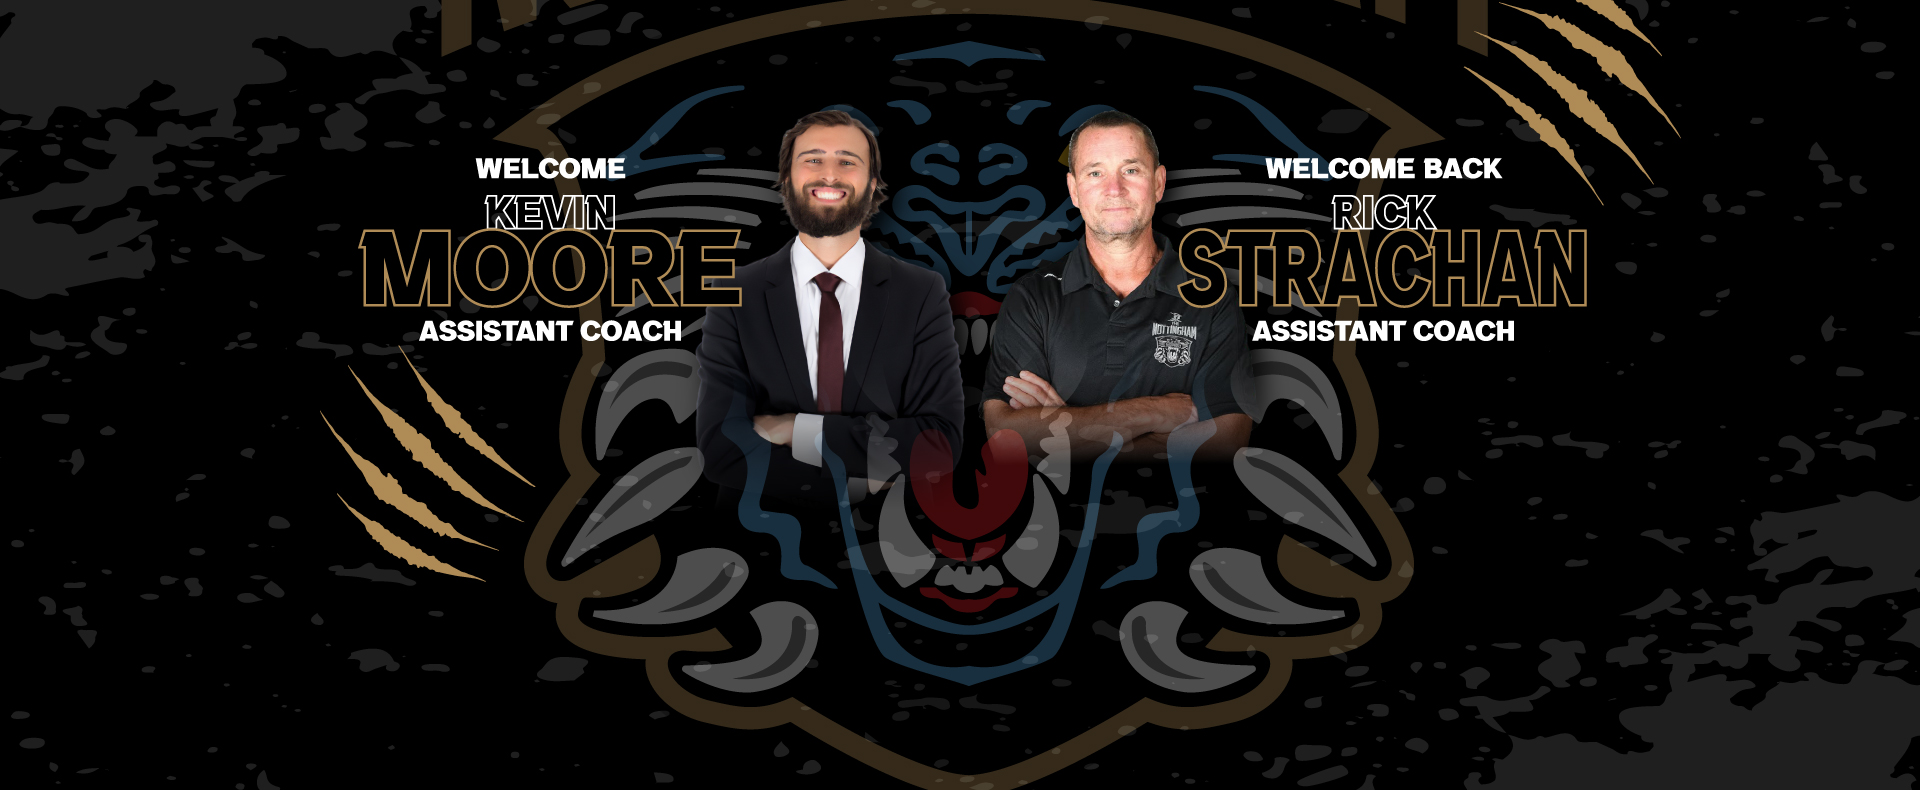 MOORE AND STRACHAN NAMED PANTHERS ASSISTANT COACHES Top Image